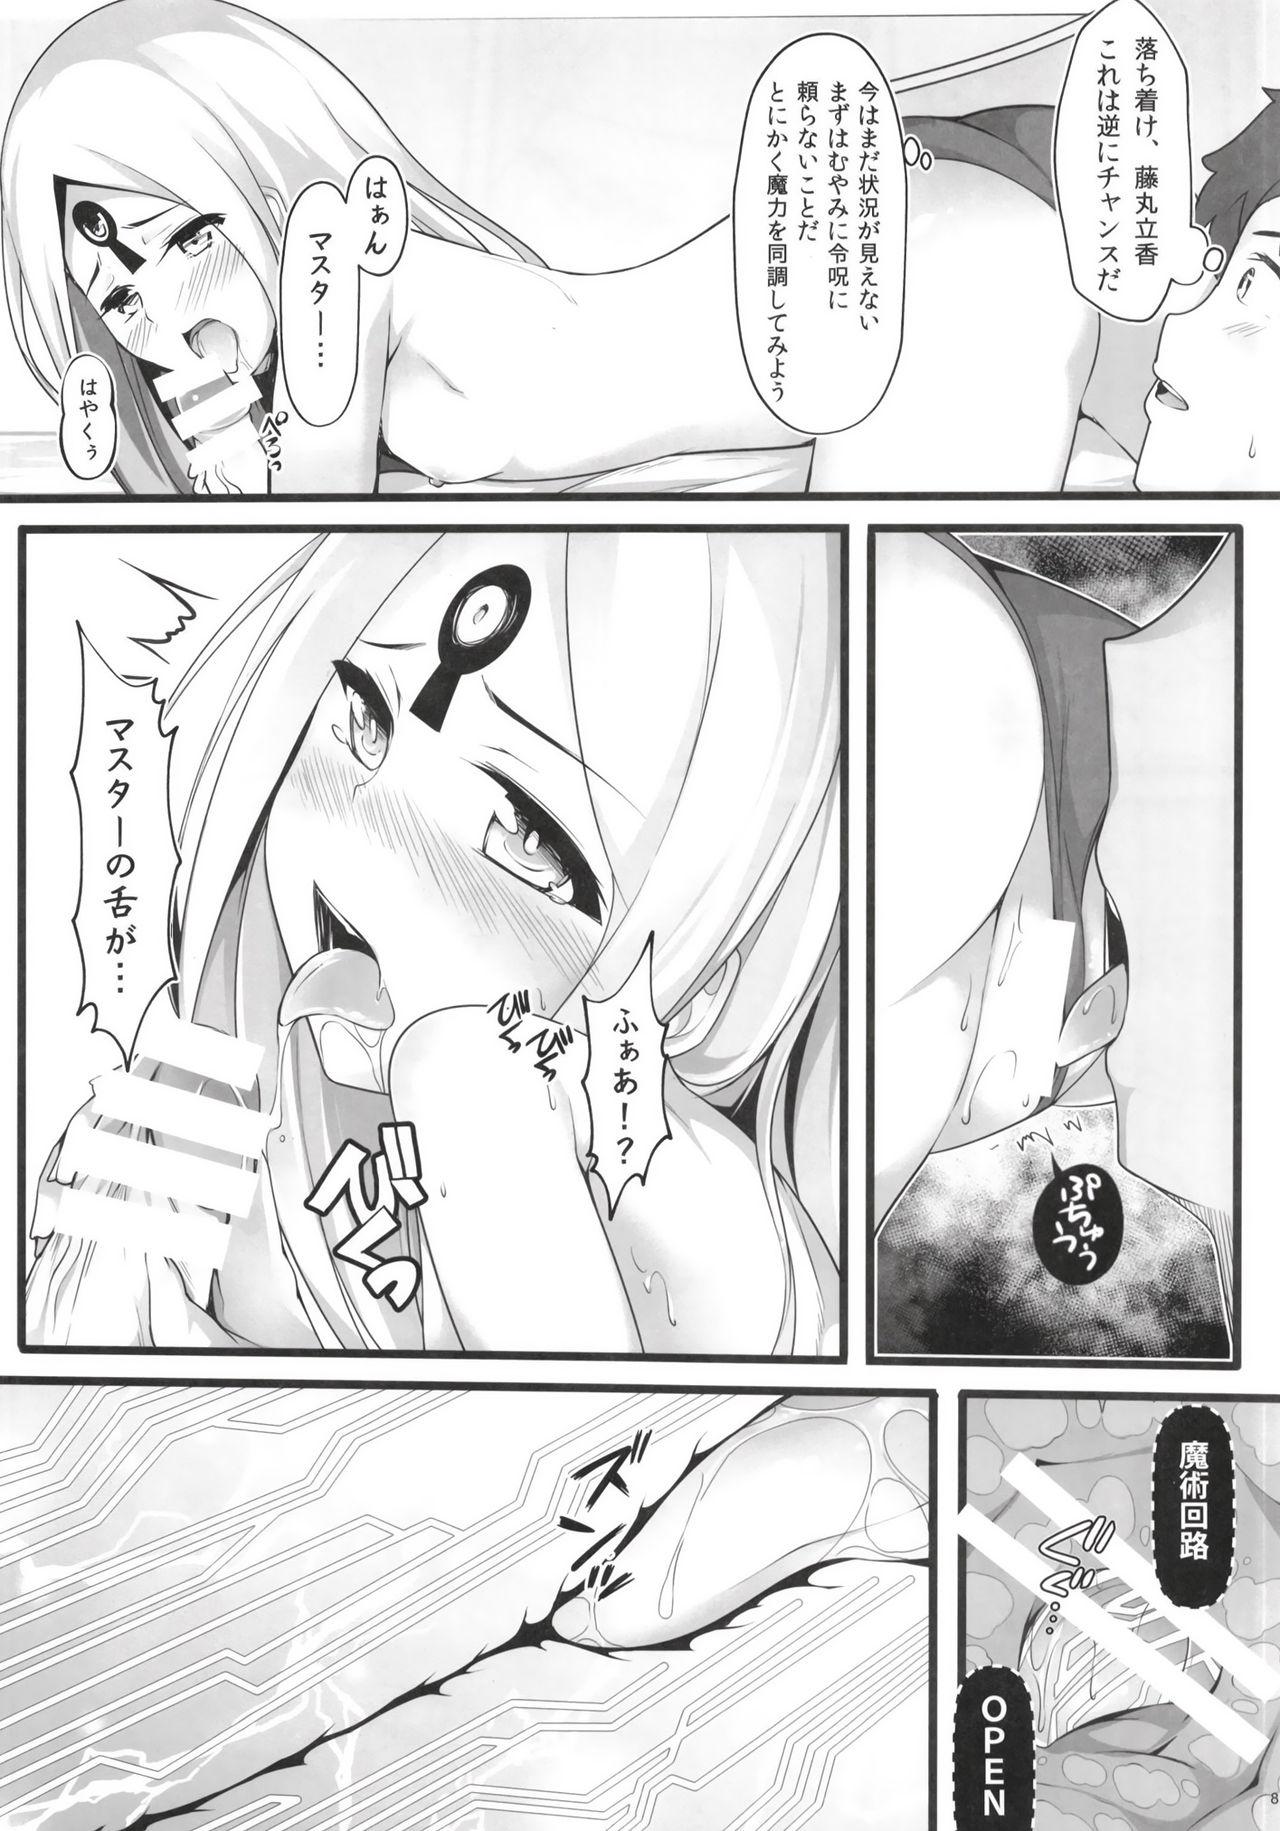 For Itannaru Sex - Fate grand order Gay Shaved - Page 8